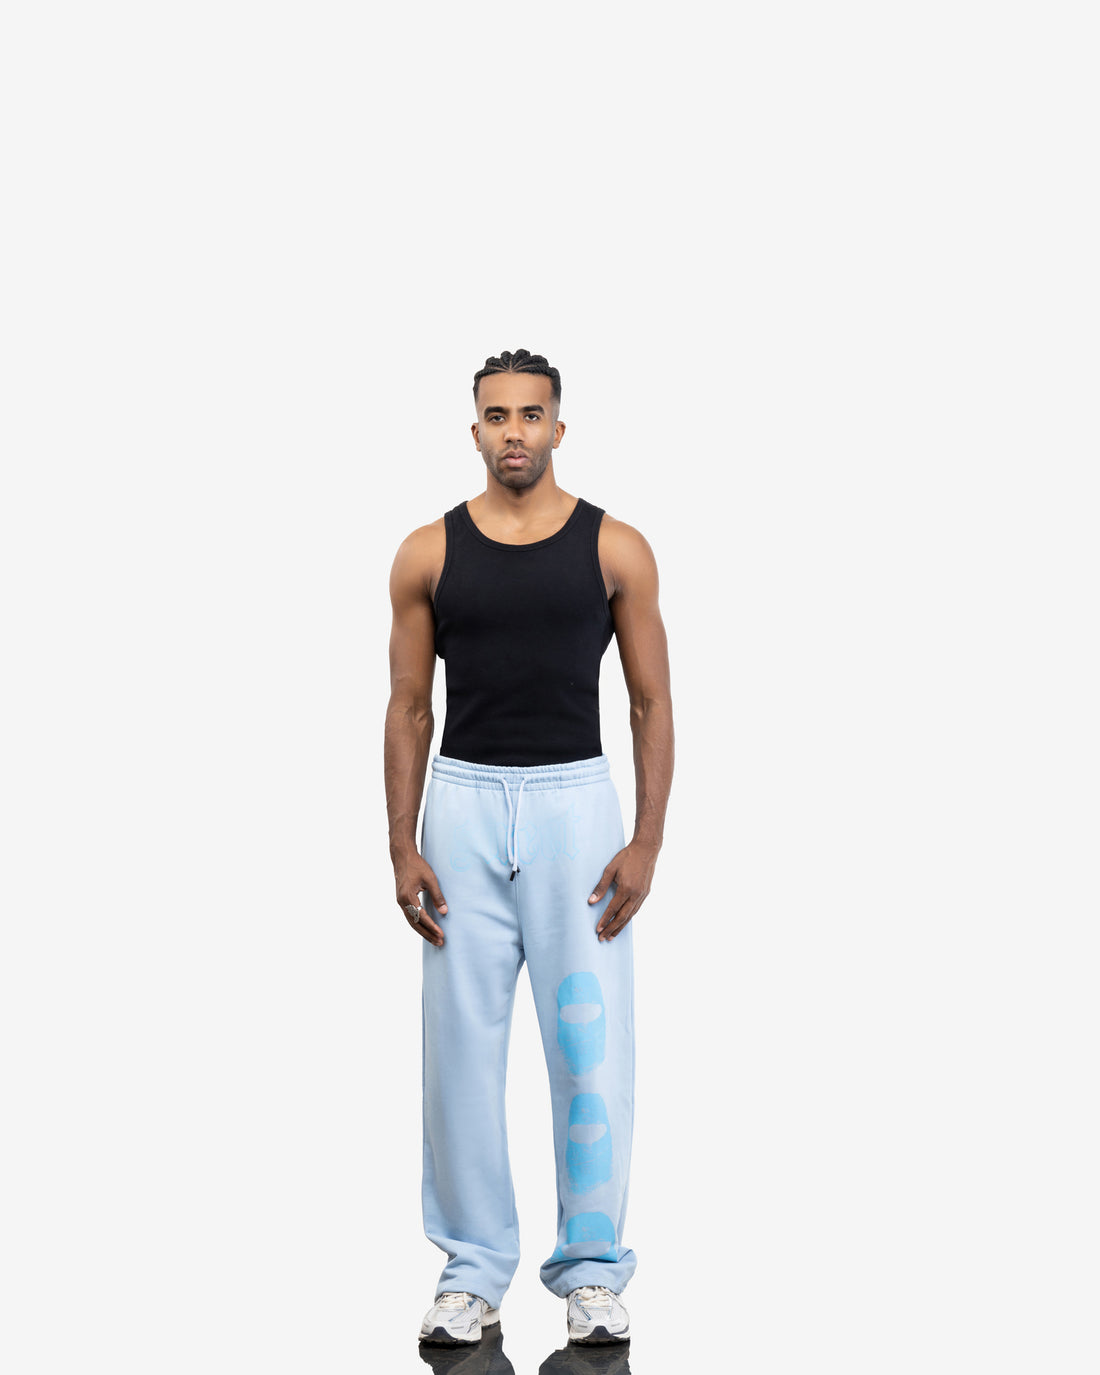 Masked Baggy Fit Sweatpant